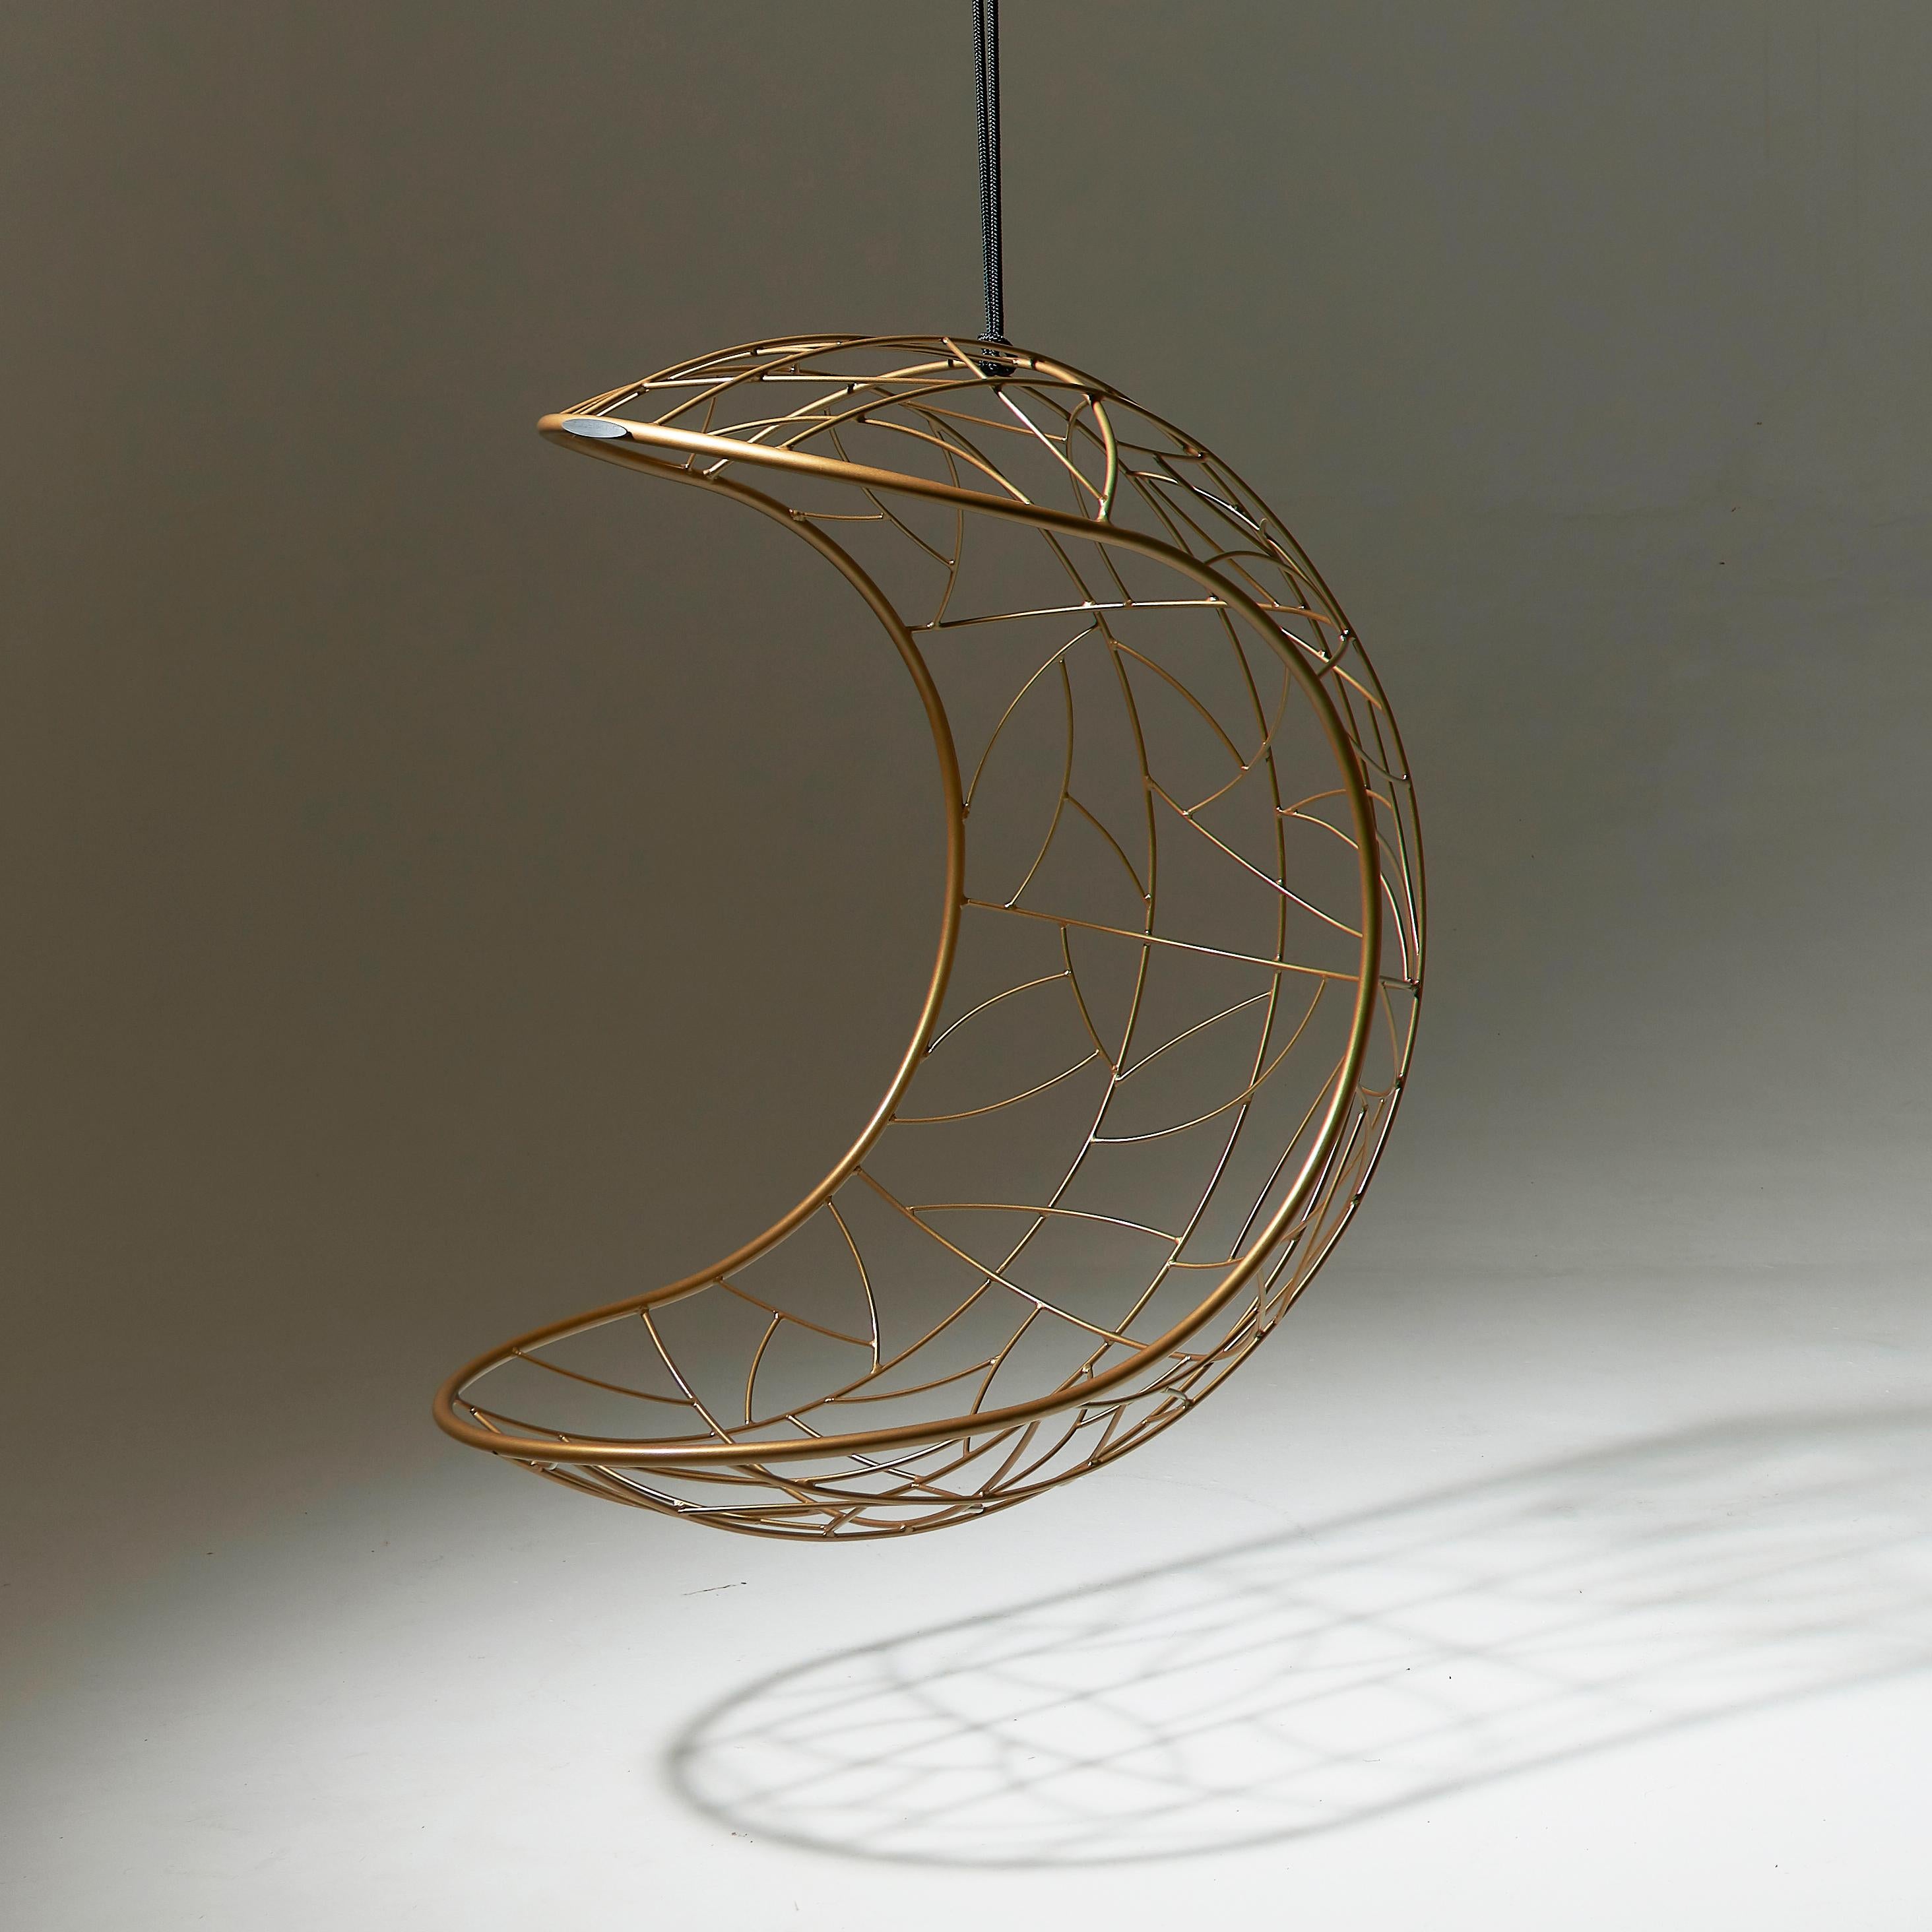 Hand-Crafted Modern Steel Nest Shaped Swing Chair For Sale